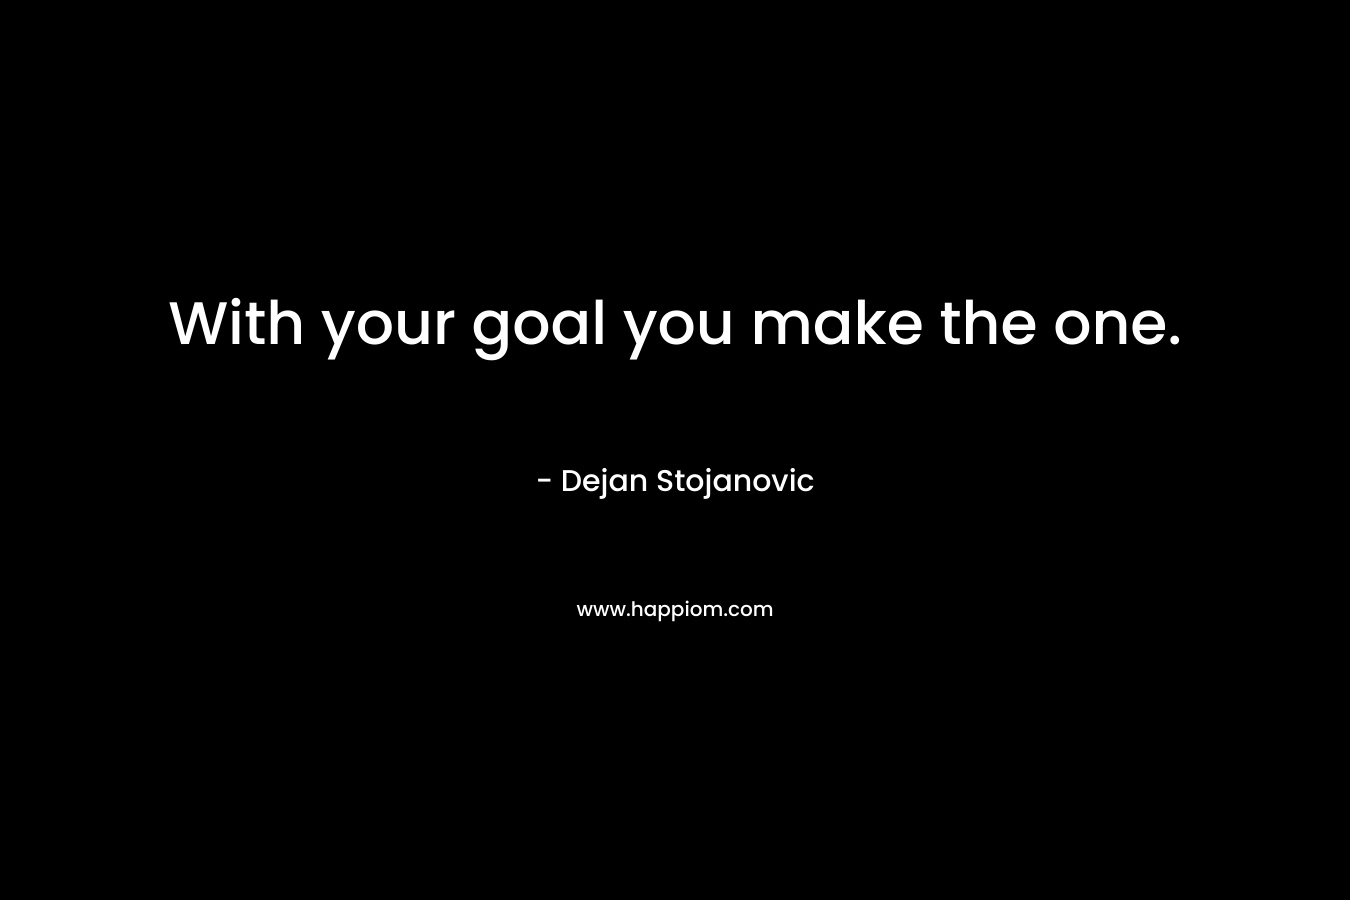 With your goal you make the one.